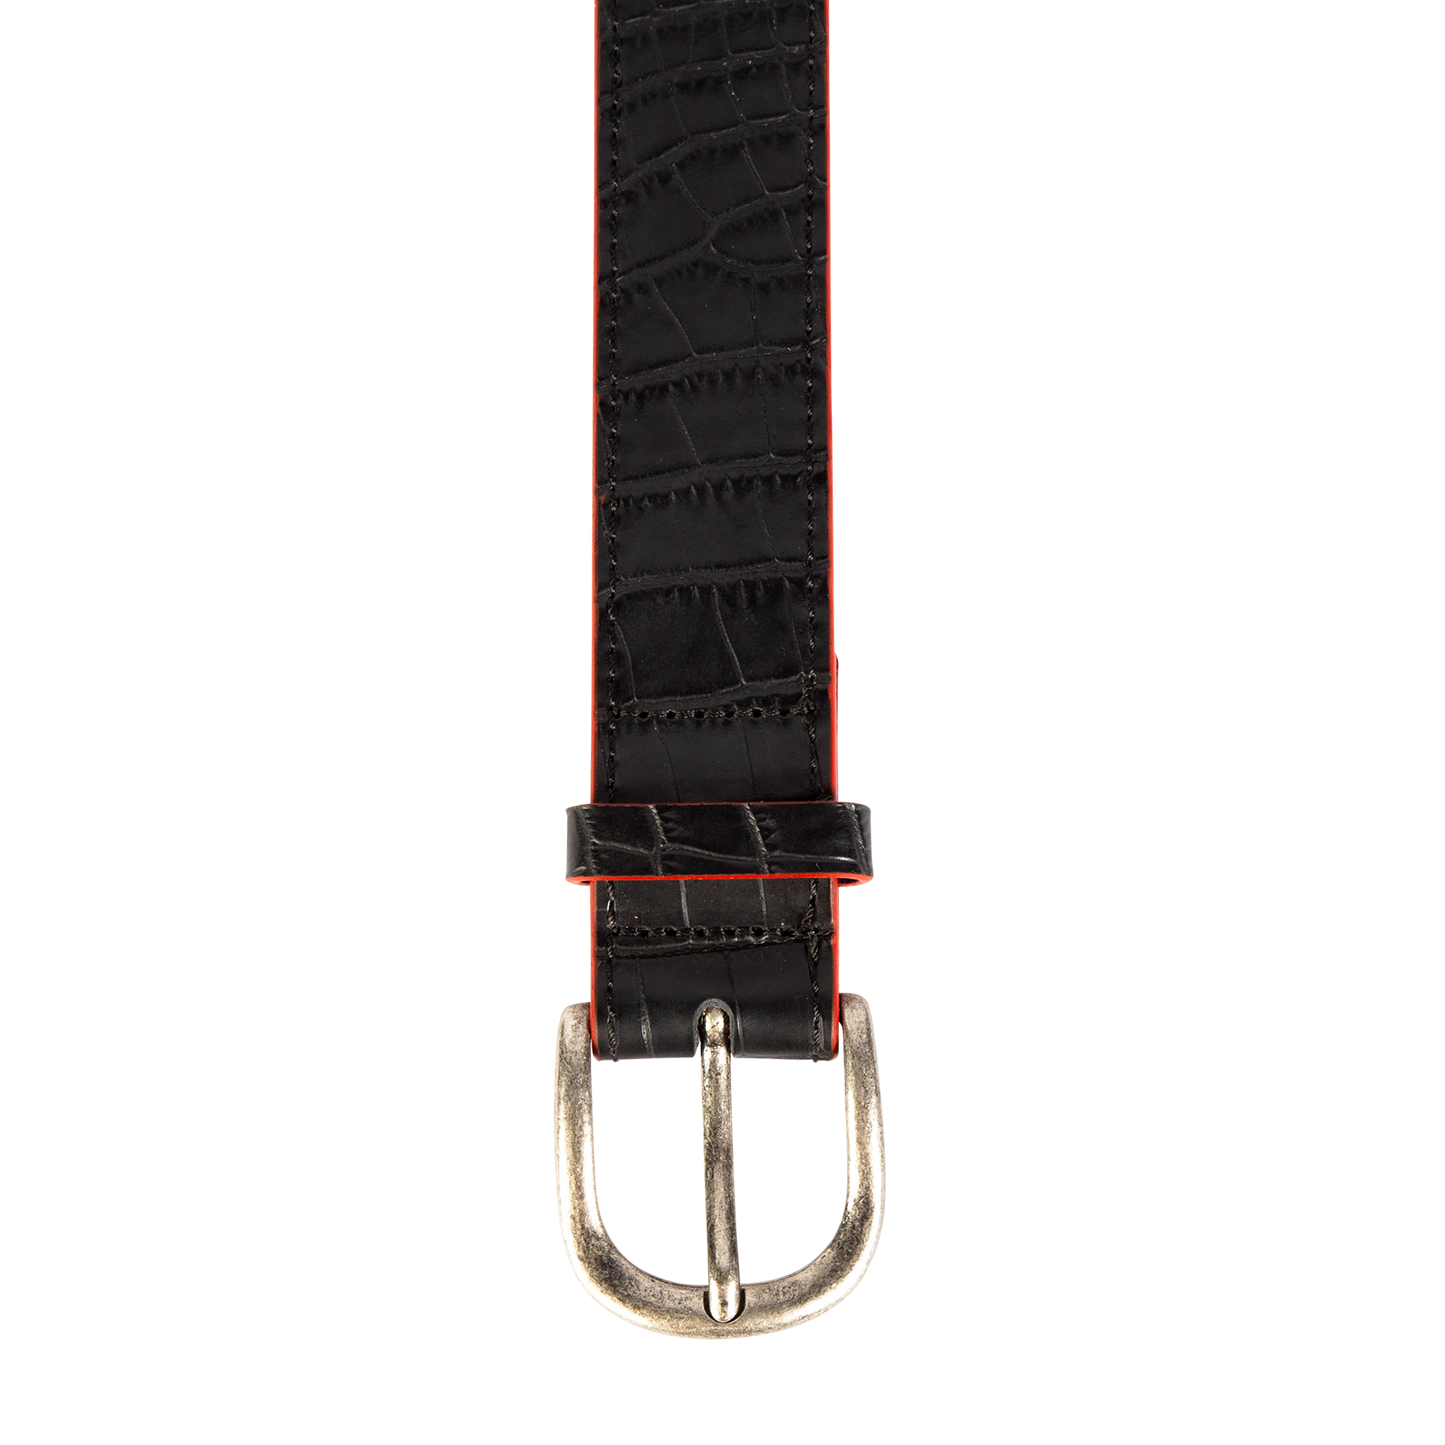 Classic black croco top view with silver buckle hardware on FREEBIRD full grain leather belt